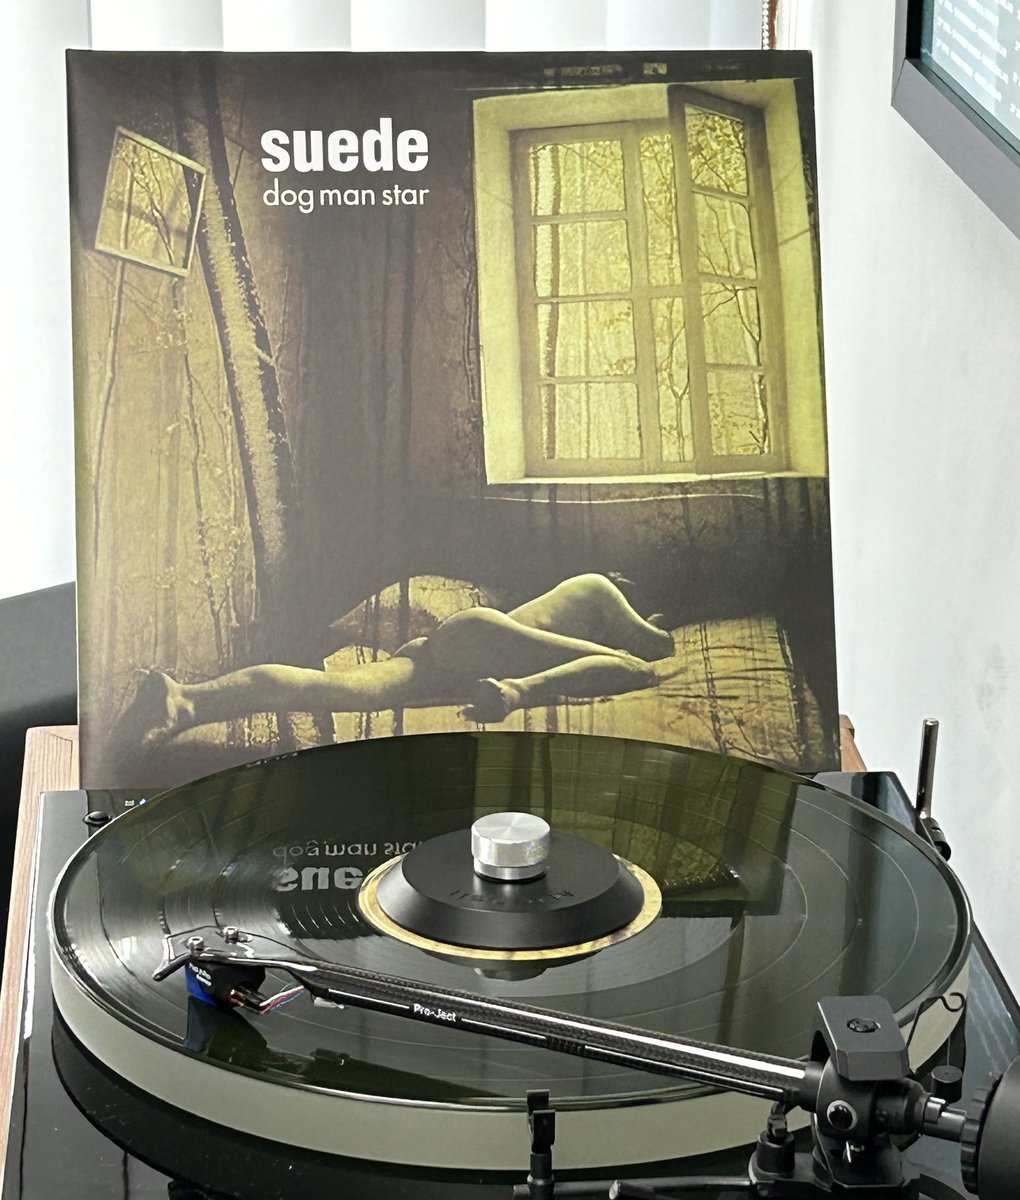 My Suede pick for #5albums90s2

Their sophomore album Dog Man Star is a dark, theatrical and atmospheric masterpiece, firmly in my top 10 albums of all time this is assured of my no.1 position in this unbelievably strong semi..